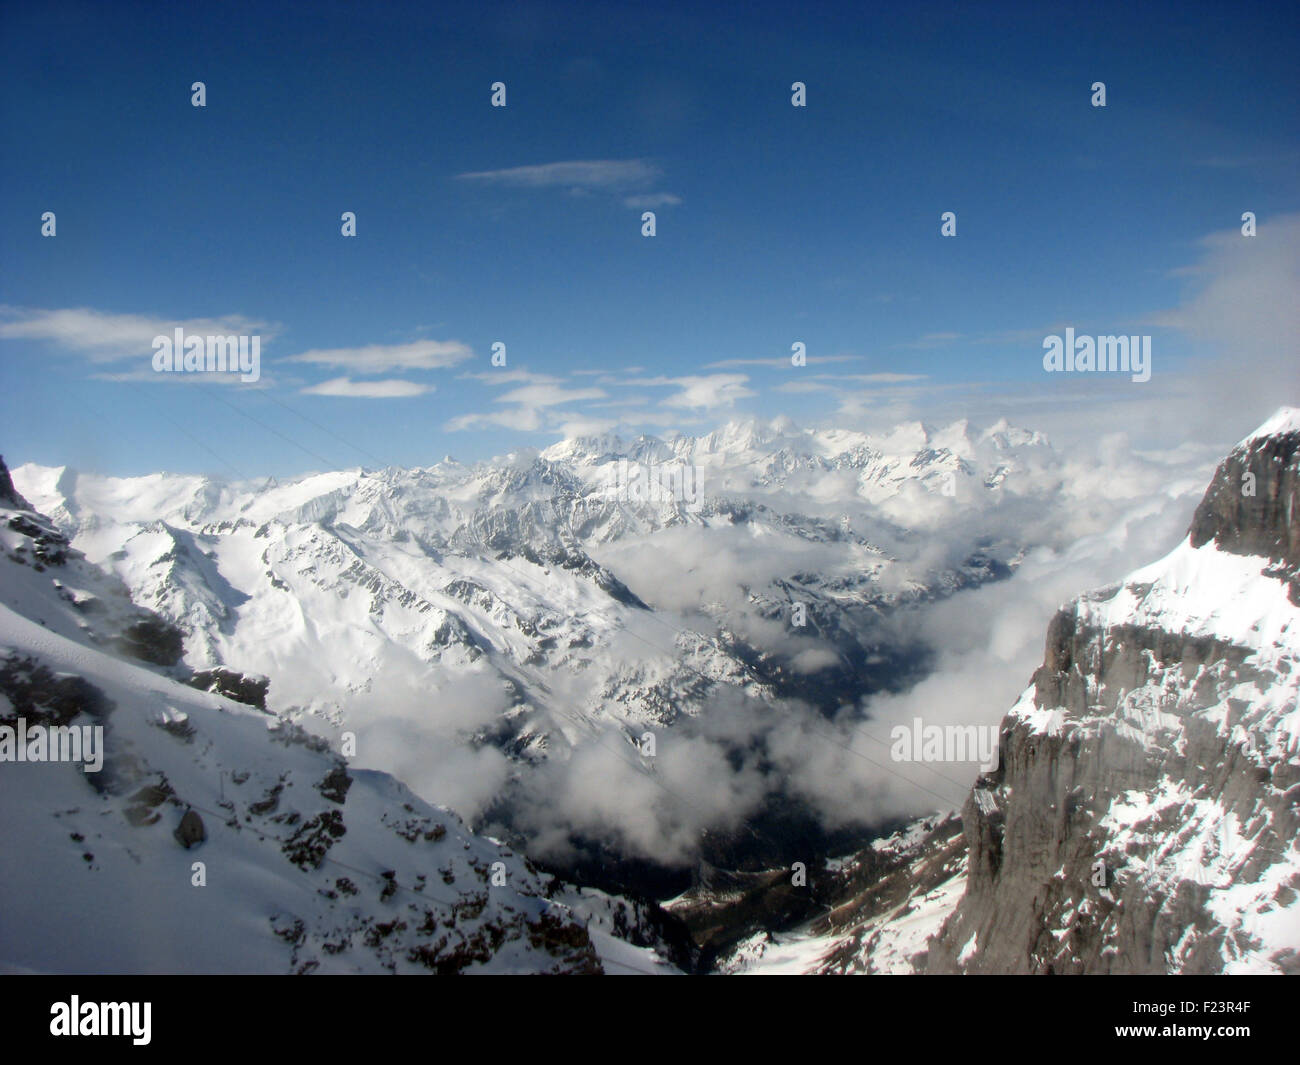 A birdseye view of the snowy peaks in the swiss alps. Stock Photo